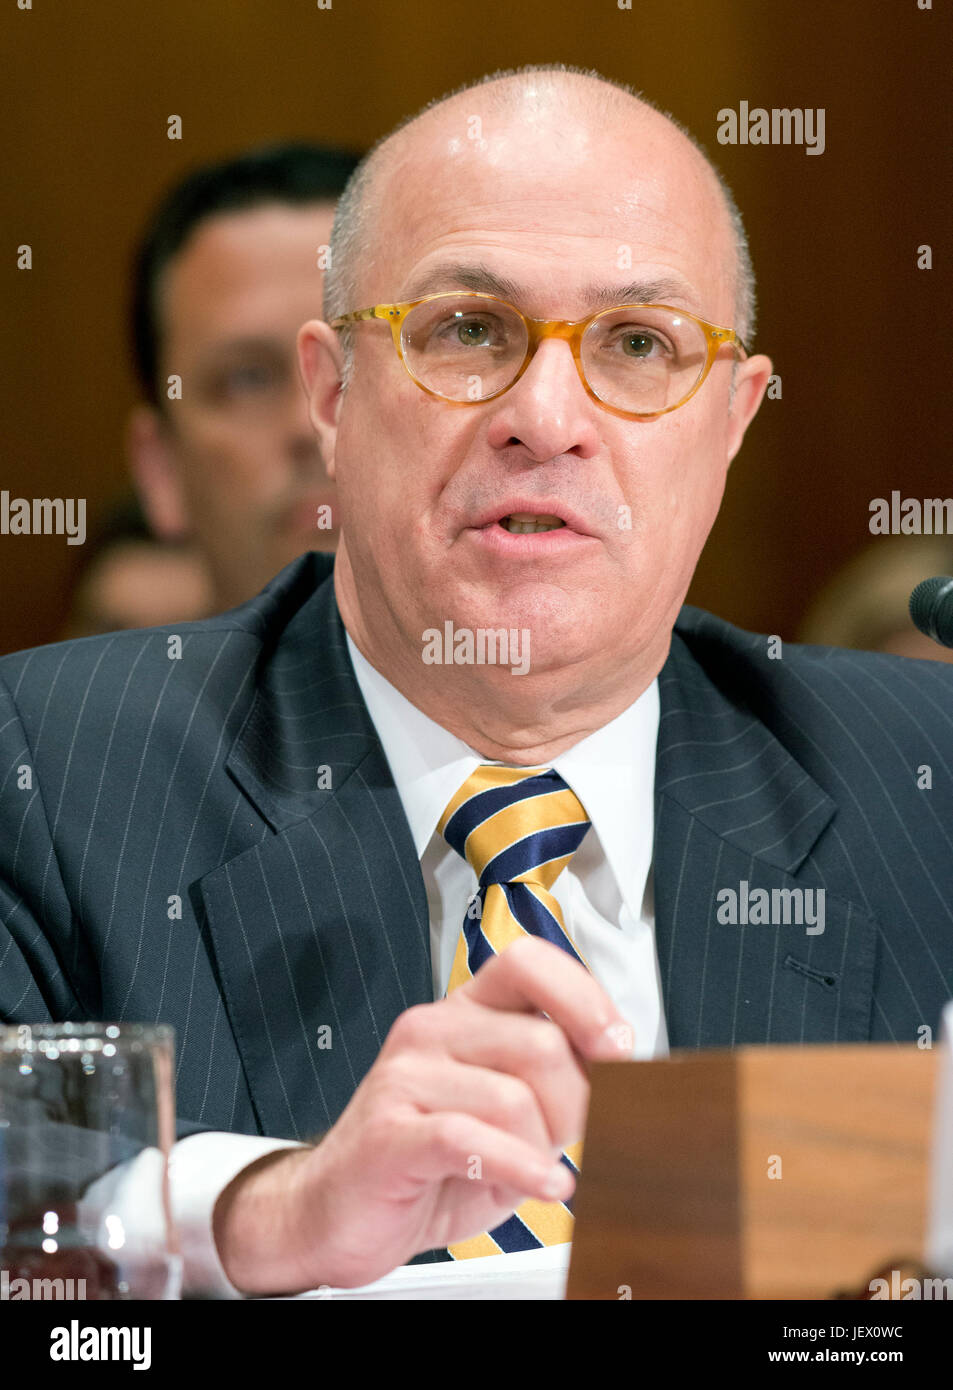 J. Christopher Giancarlo, Acting Chairman, Commodity Futures Trading Commission, testifies before the US Senate Committee on Appropriations Subcommittee on Financial Services and General Government hearing to examine proposed budget estimates and justification for fiscal year 2018 for the SEC and the CFTC on Capitol Hill in Washington, DC on Tuesday, June 27, 2017. Credit: Ron Sachs/CNP /MediaPunch Stock Photo